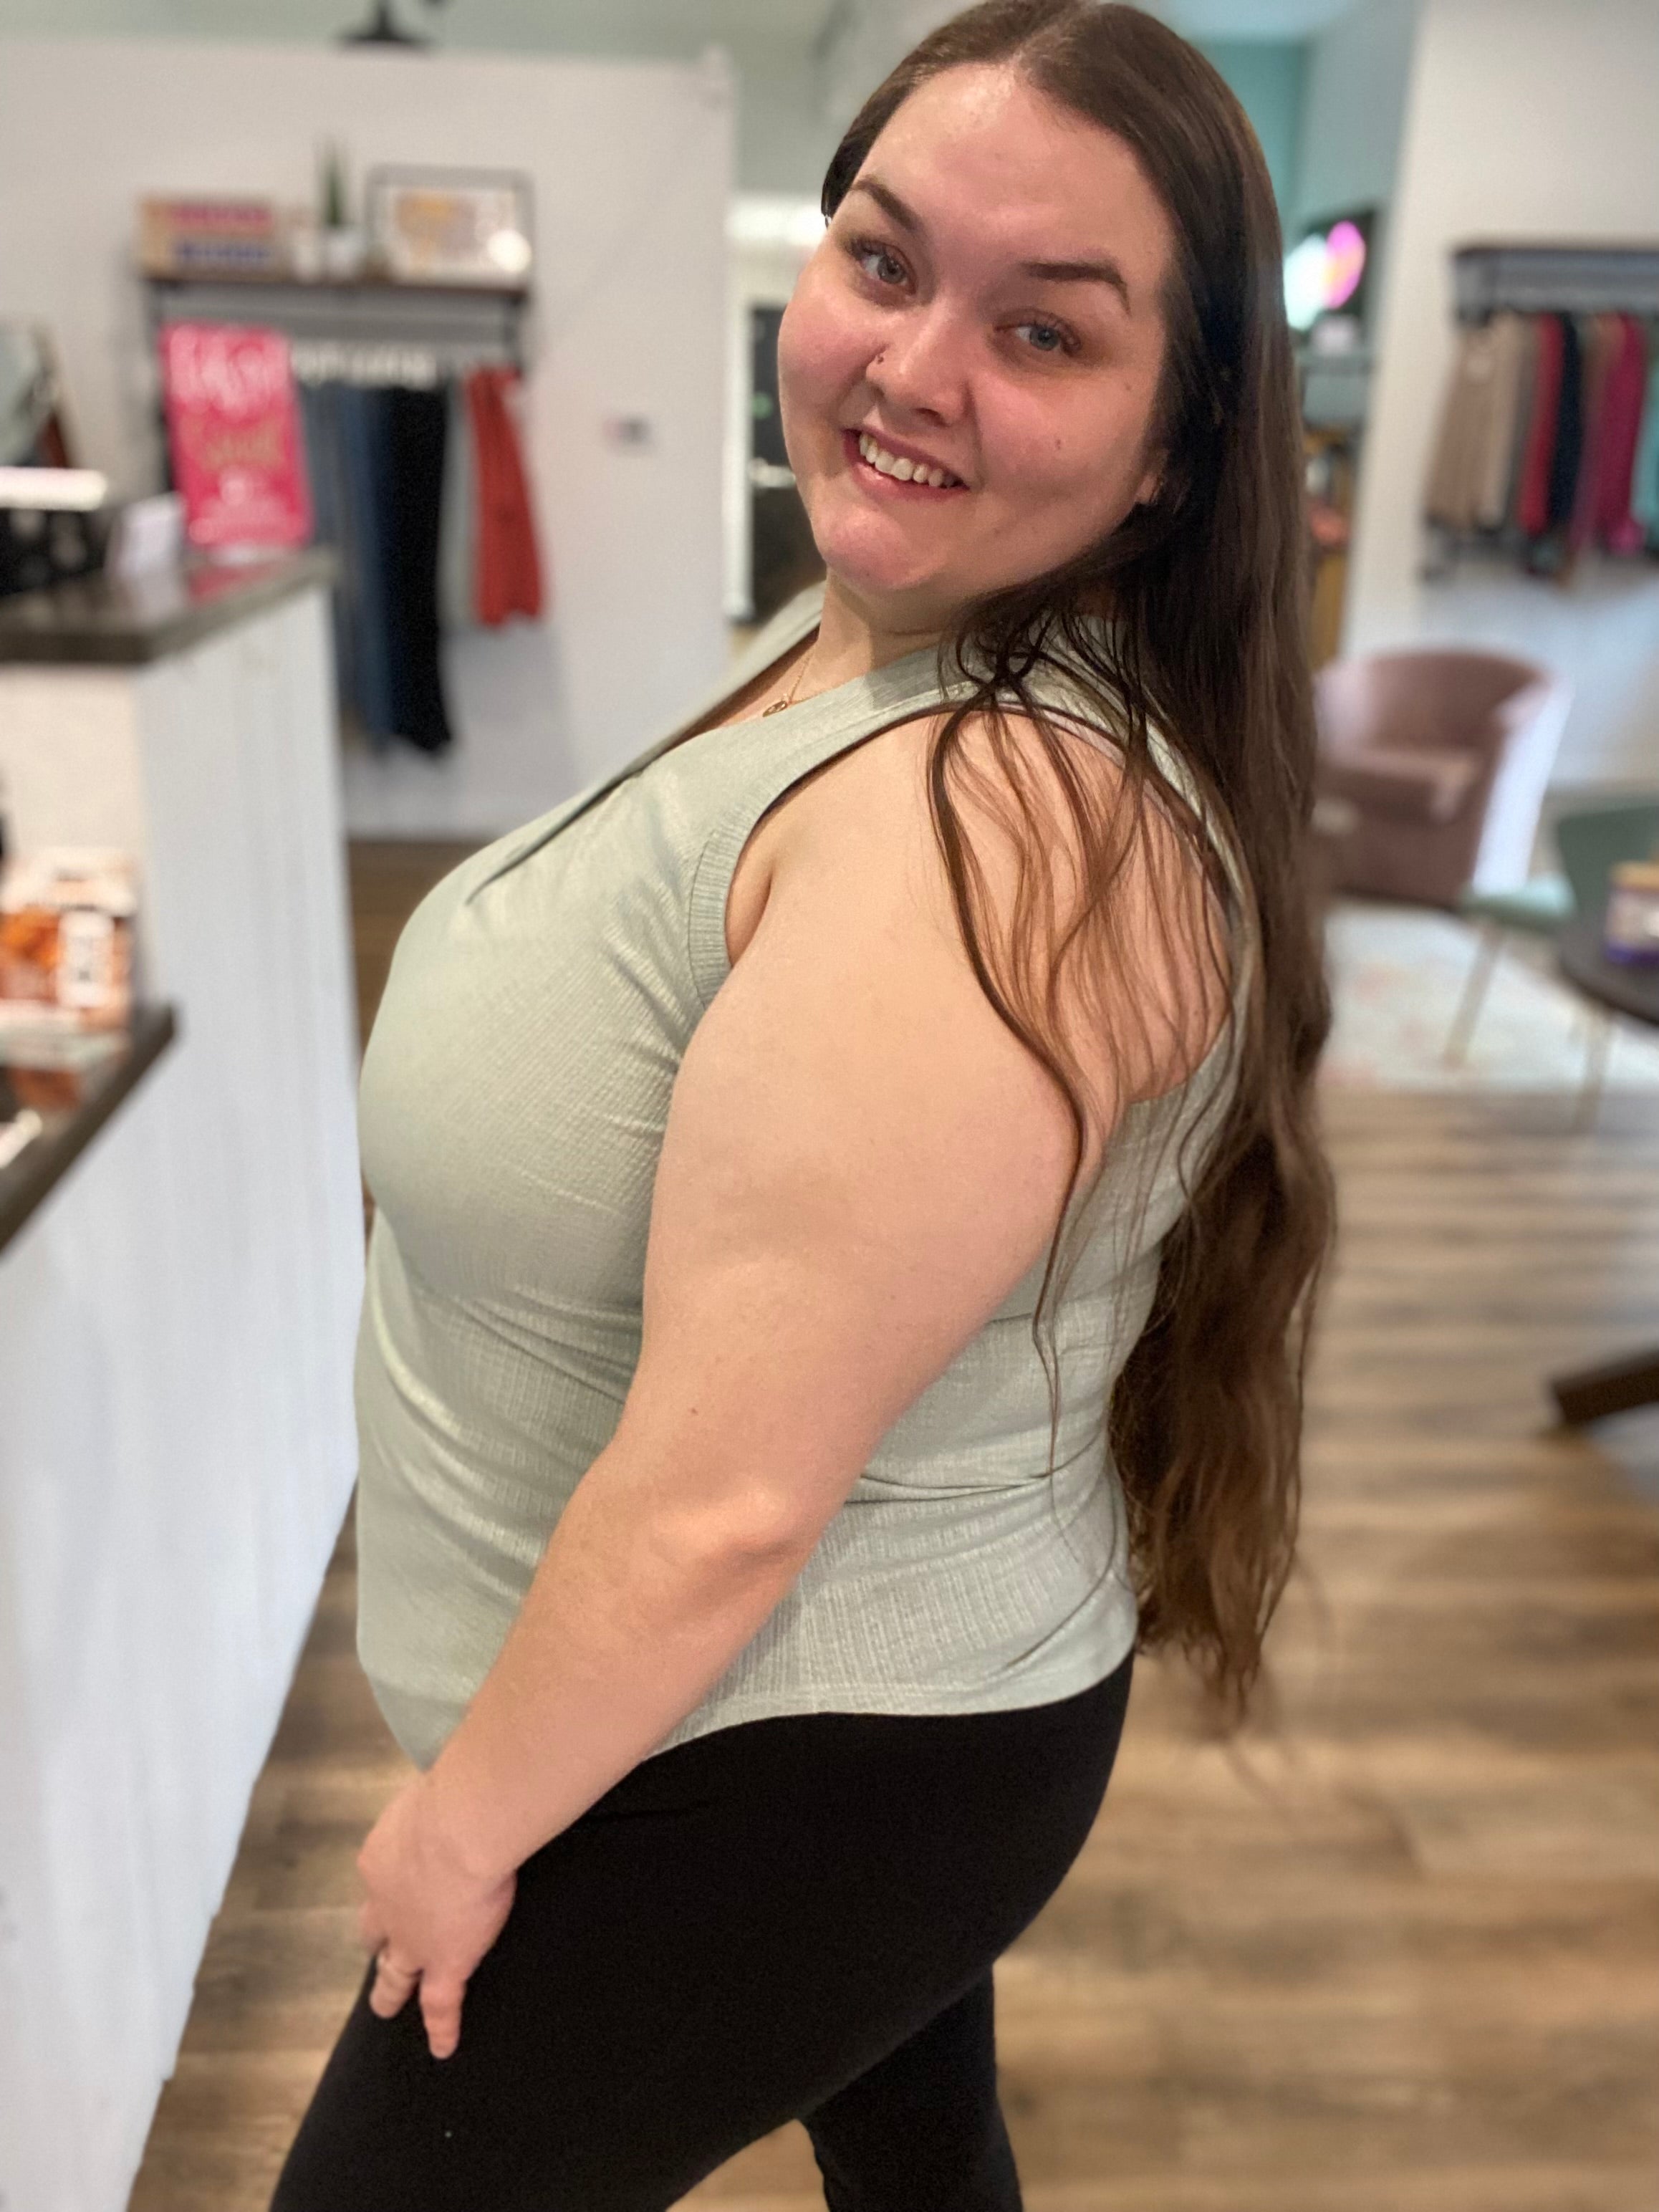 Shop Ribbed Sage Henley Tank Top-Blouse at Ruby Joy Boutique, a Women's Clothing Store in Pickerington, Ohio